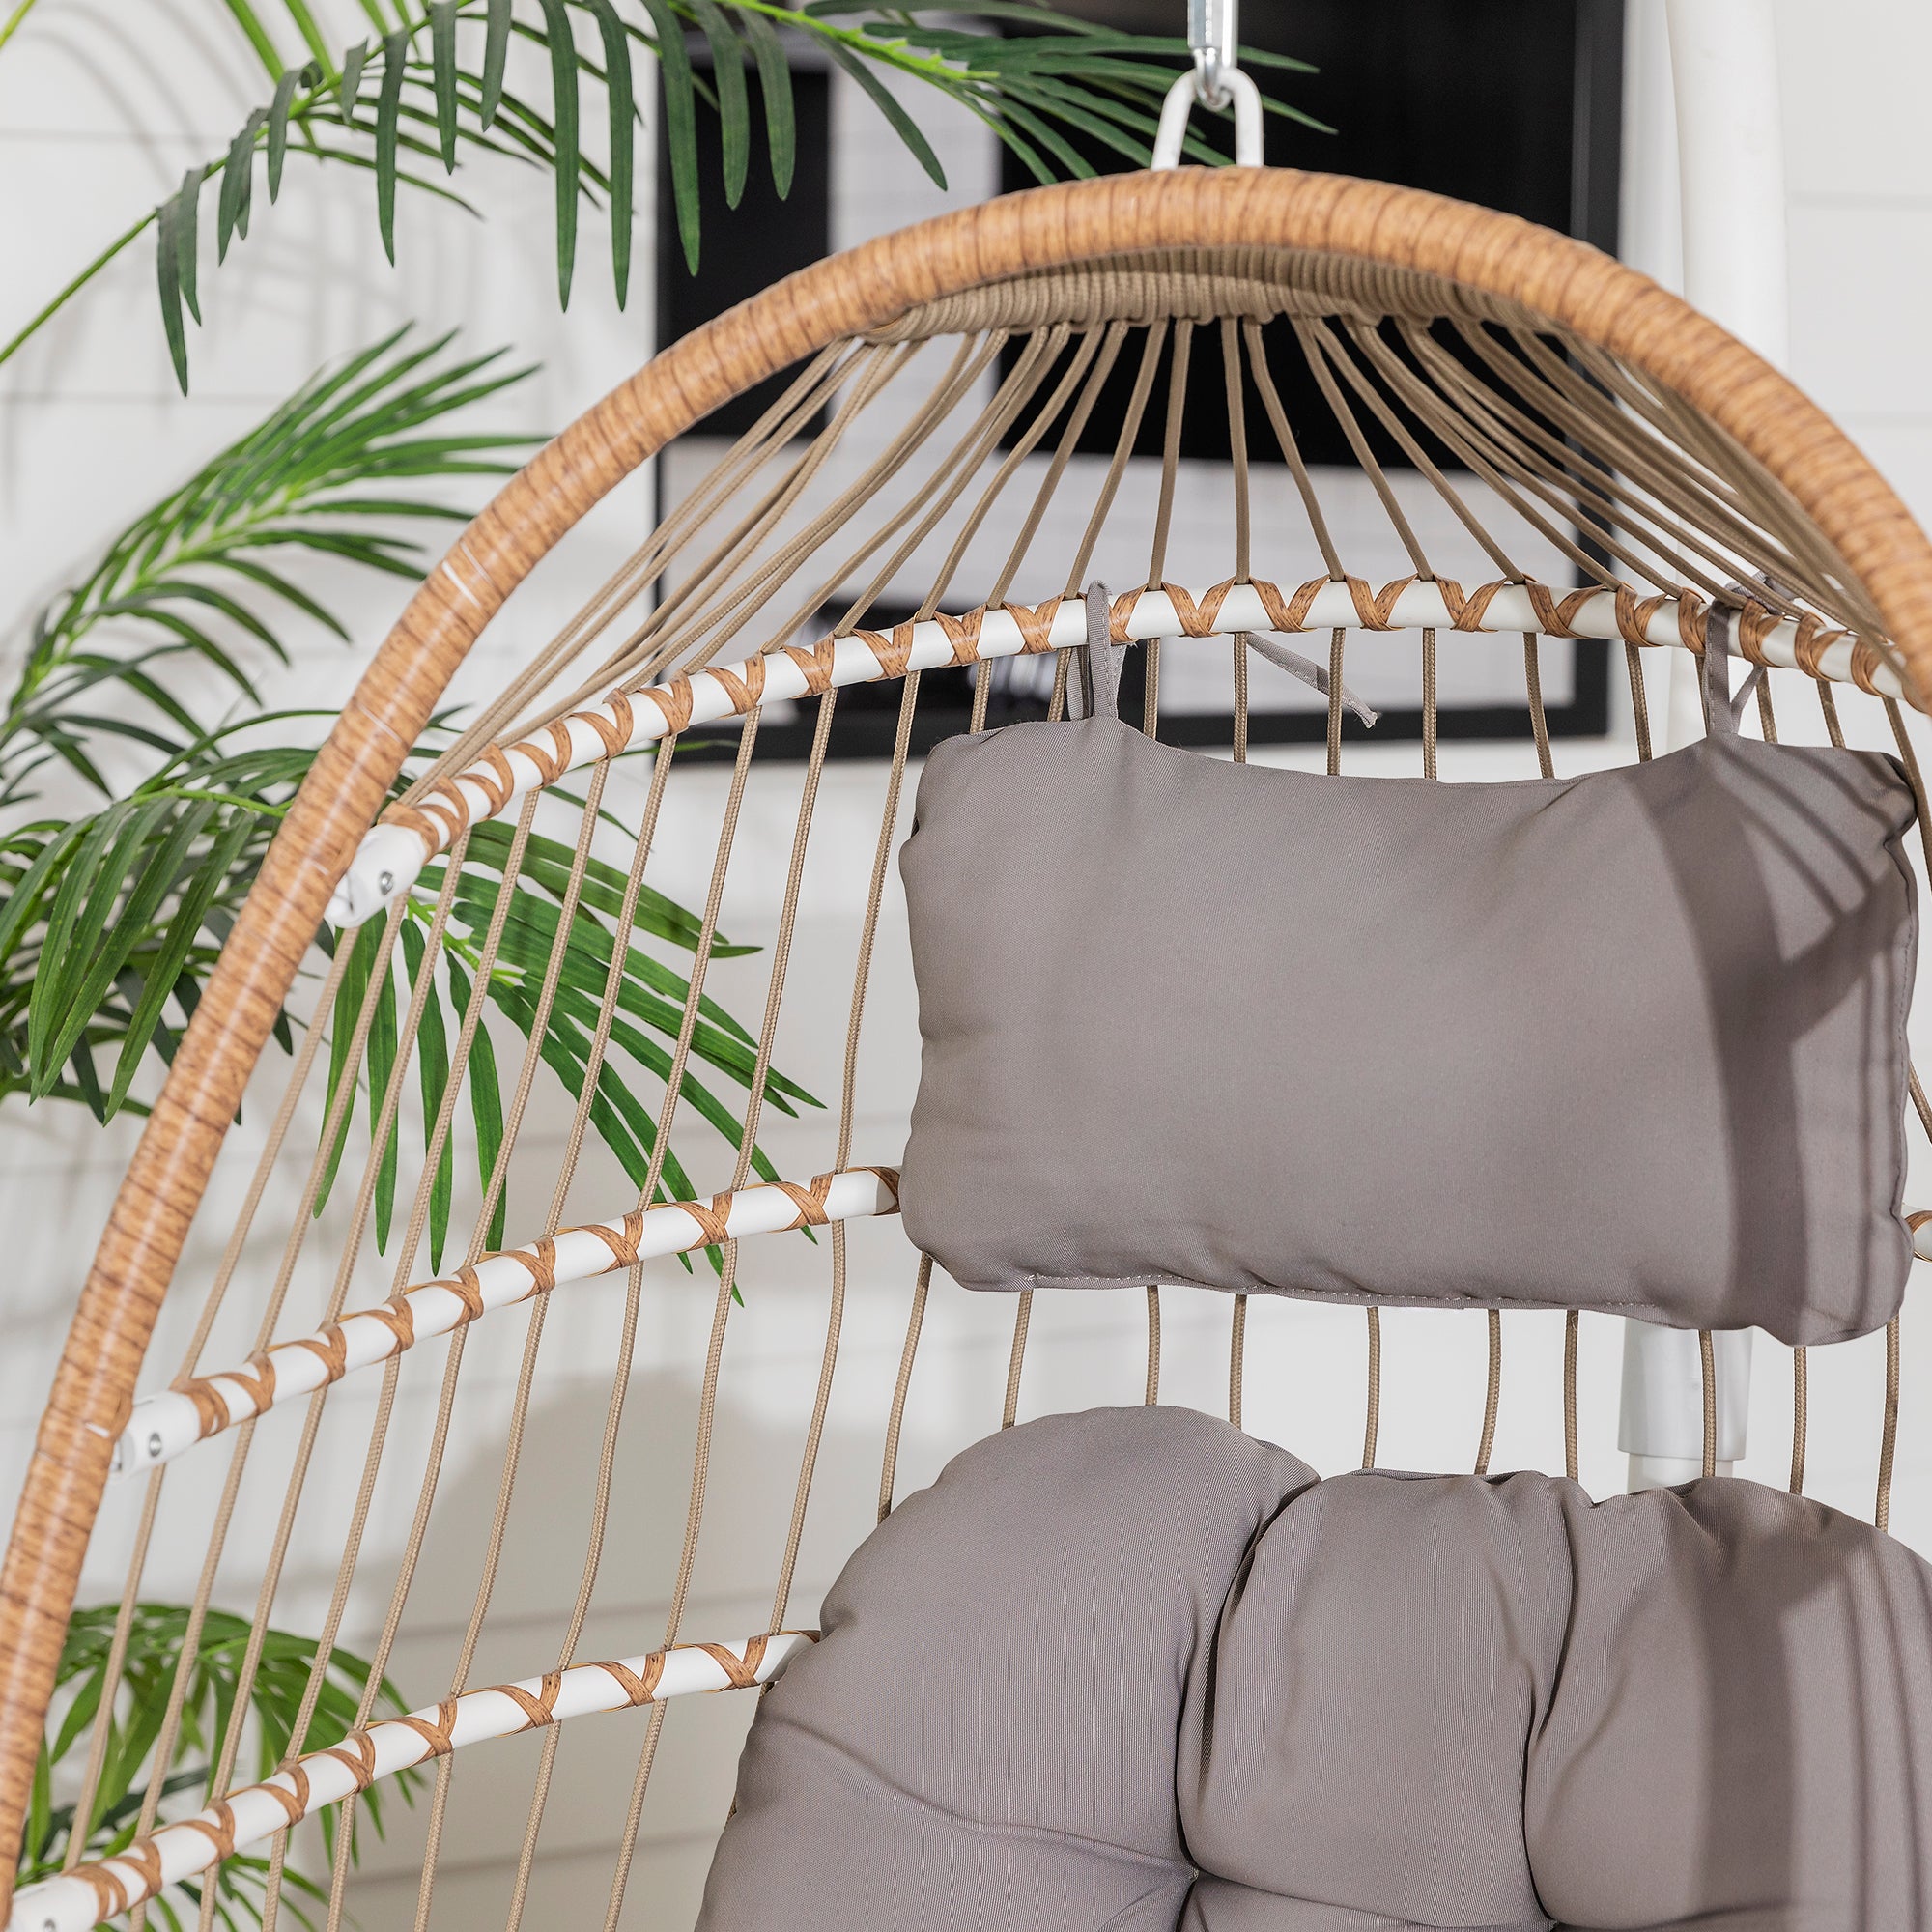 Hammock Swing Chair with Stand - East Shore Modern Home Furnishings